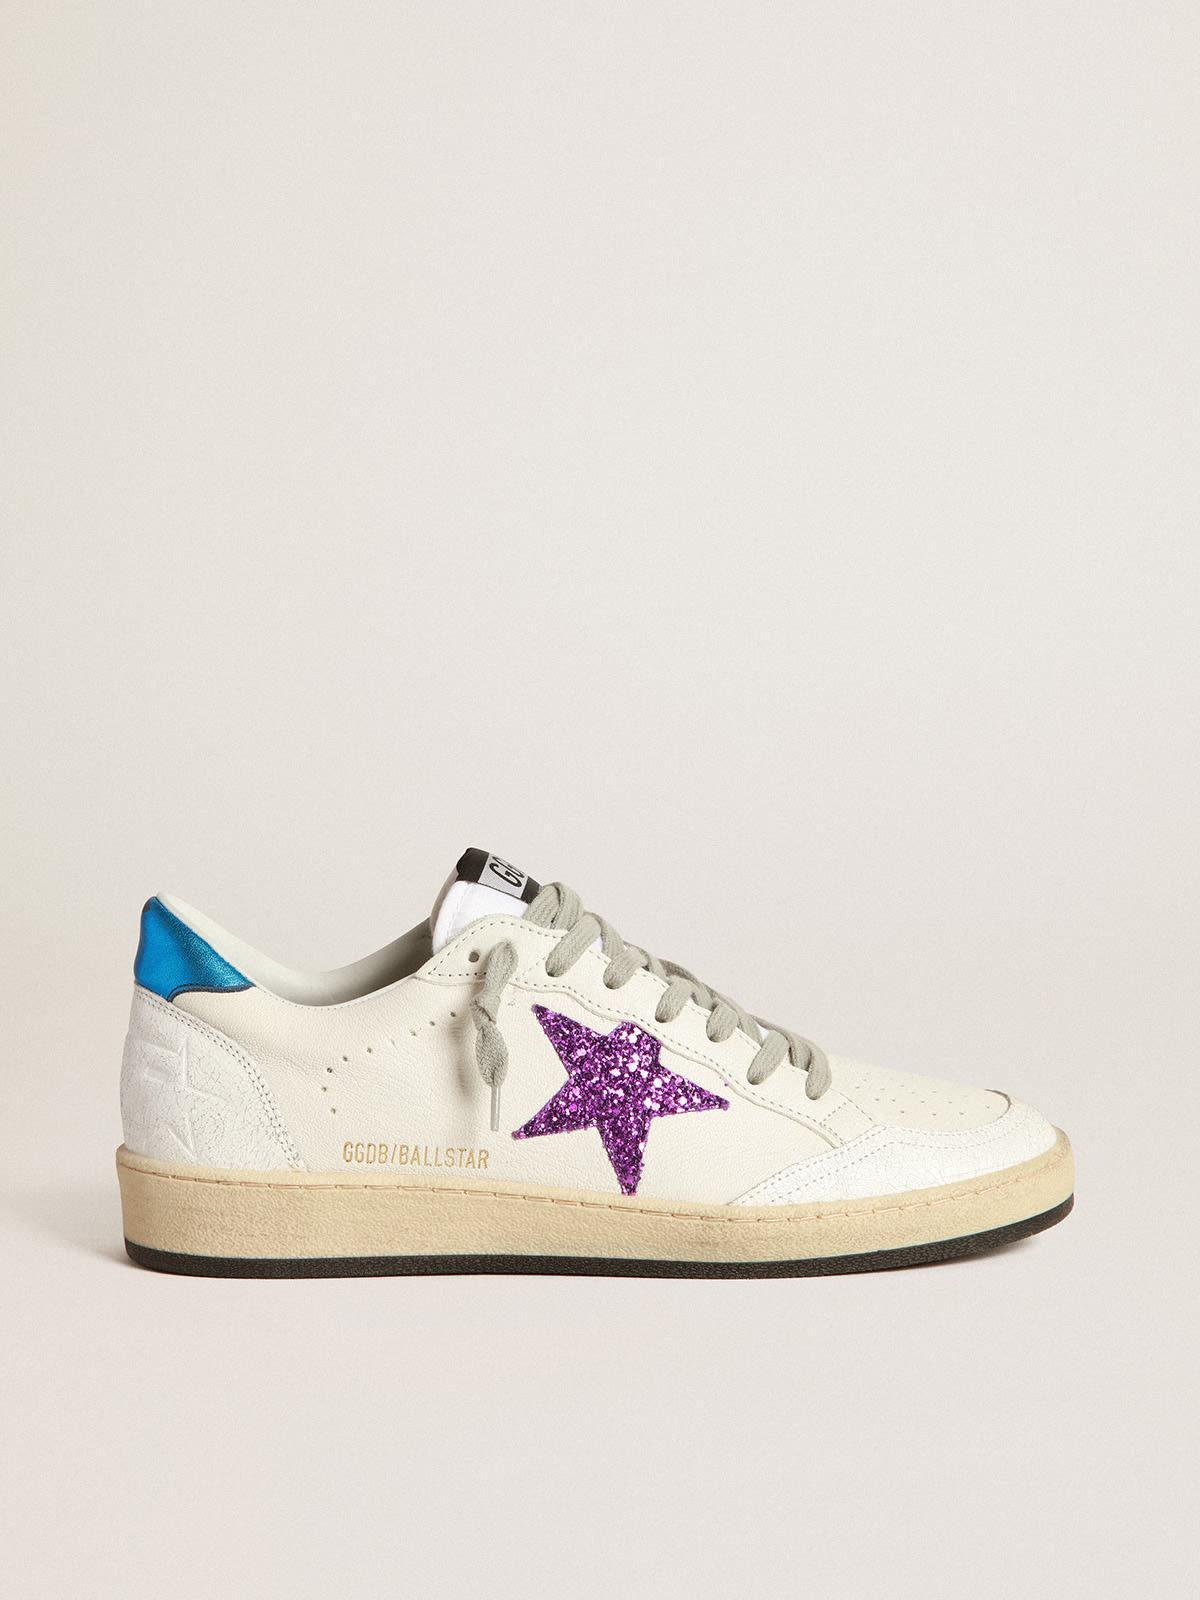 Golden Goose - Ball Star sneakers in white leather with purple glitter star   in 